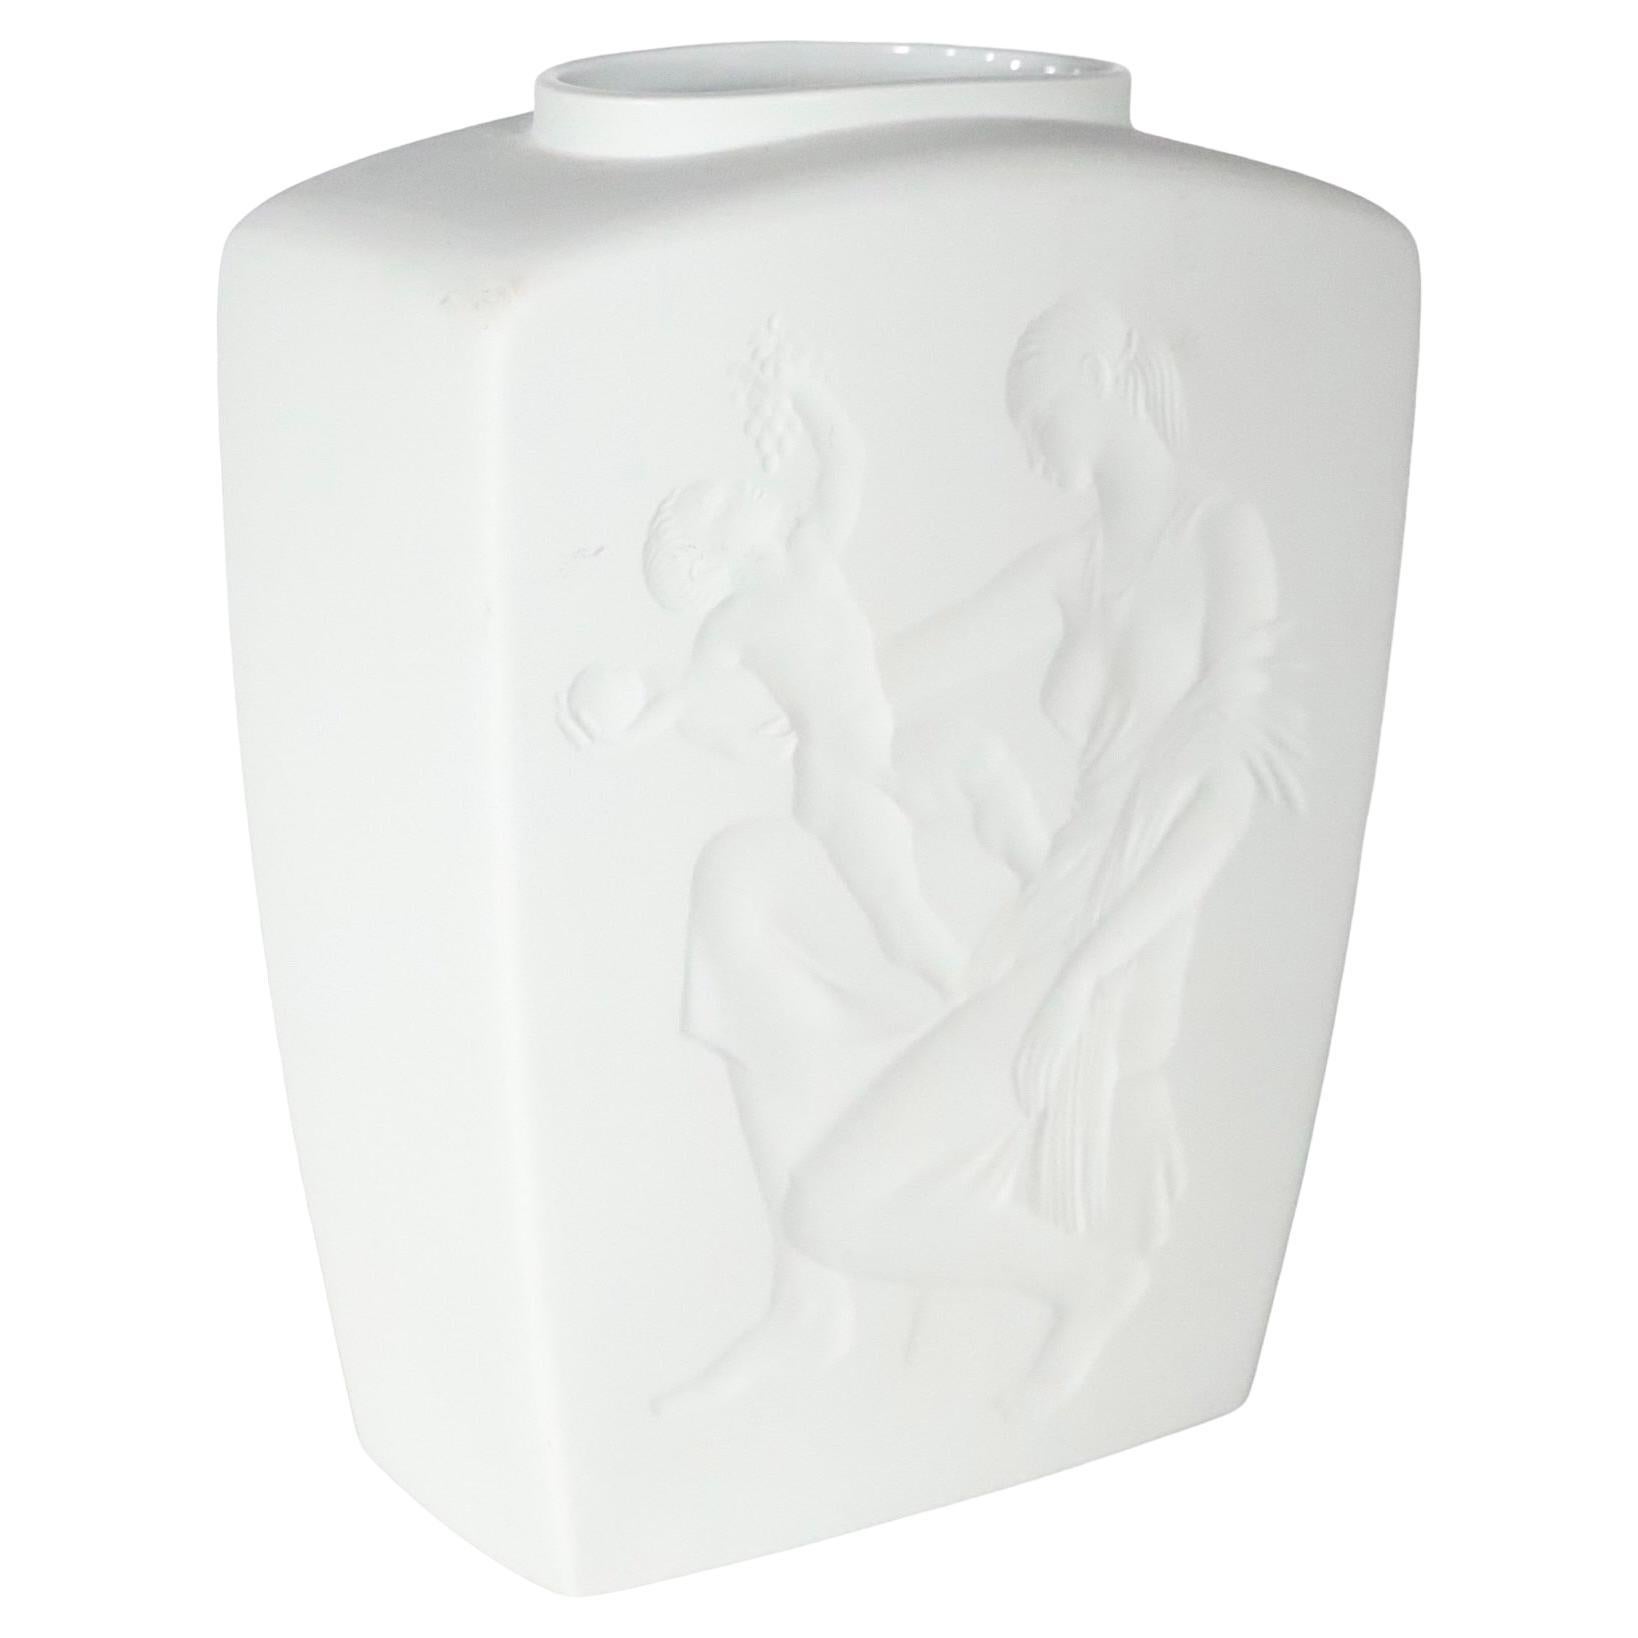 Exquisite Art Deco bisque vase in a  sophisticated white on white color way. The vase features a classical mother and child scene, executed in dimensional relief.
 The piece is in excellent, original, clean and ready to display condition, free of